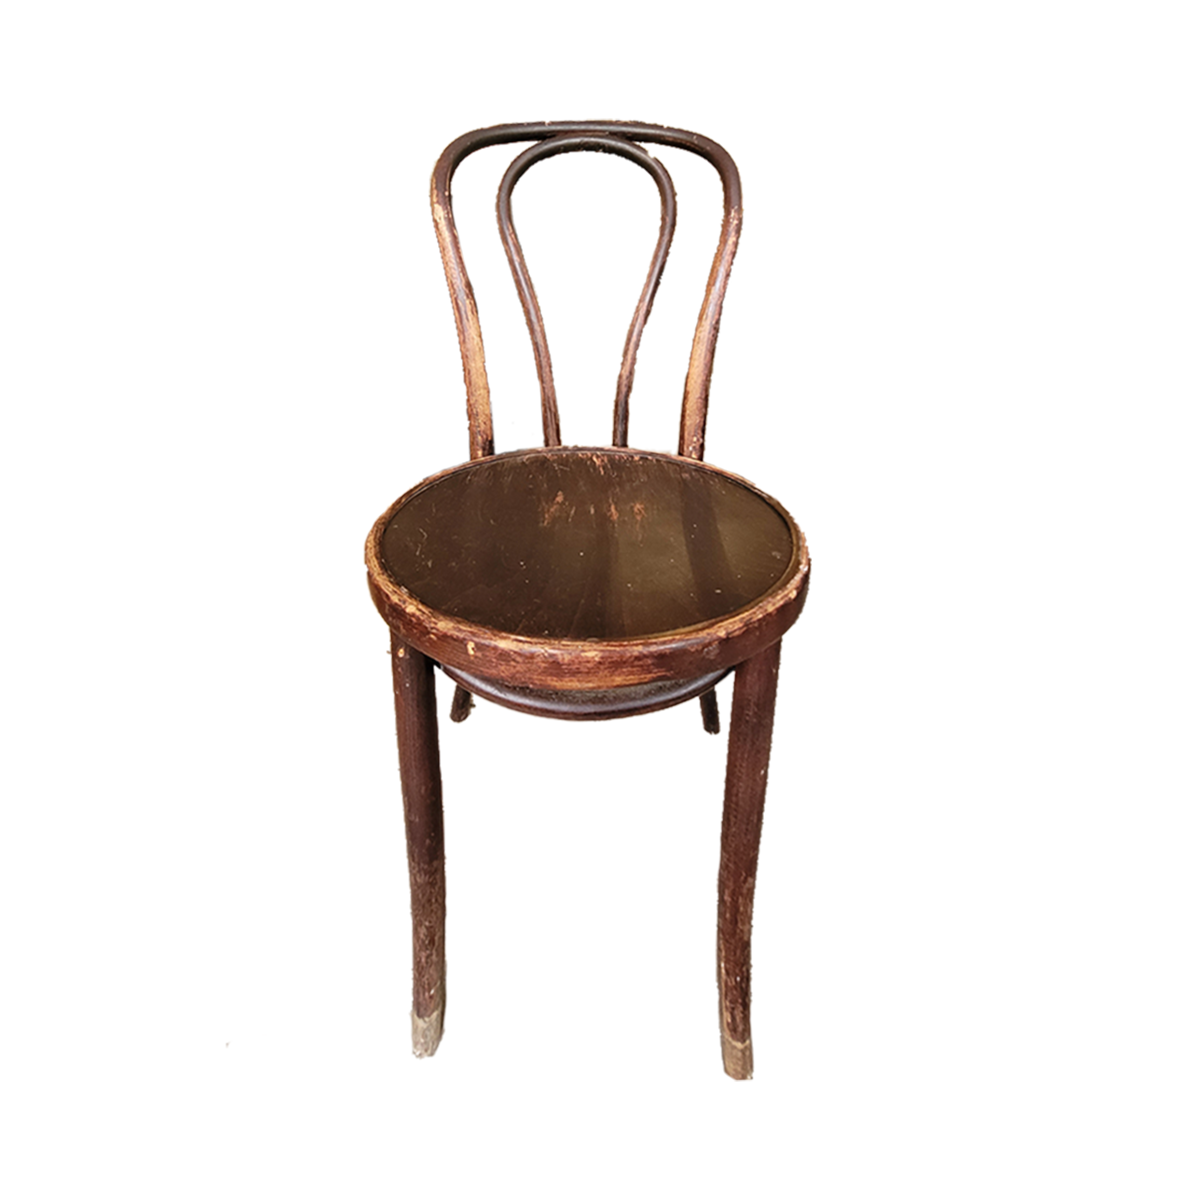 Set of 4 Thonet style chairs with wooden seat are perfect as dining chairs or accent chairs. 